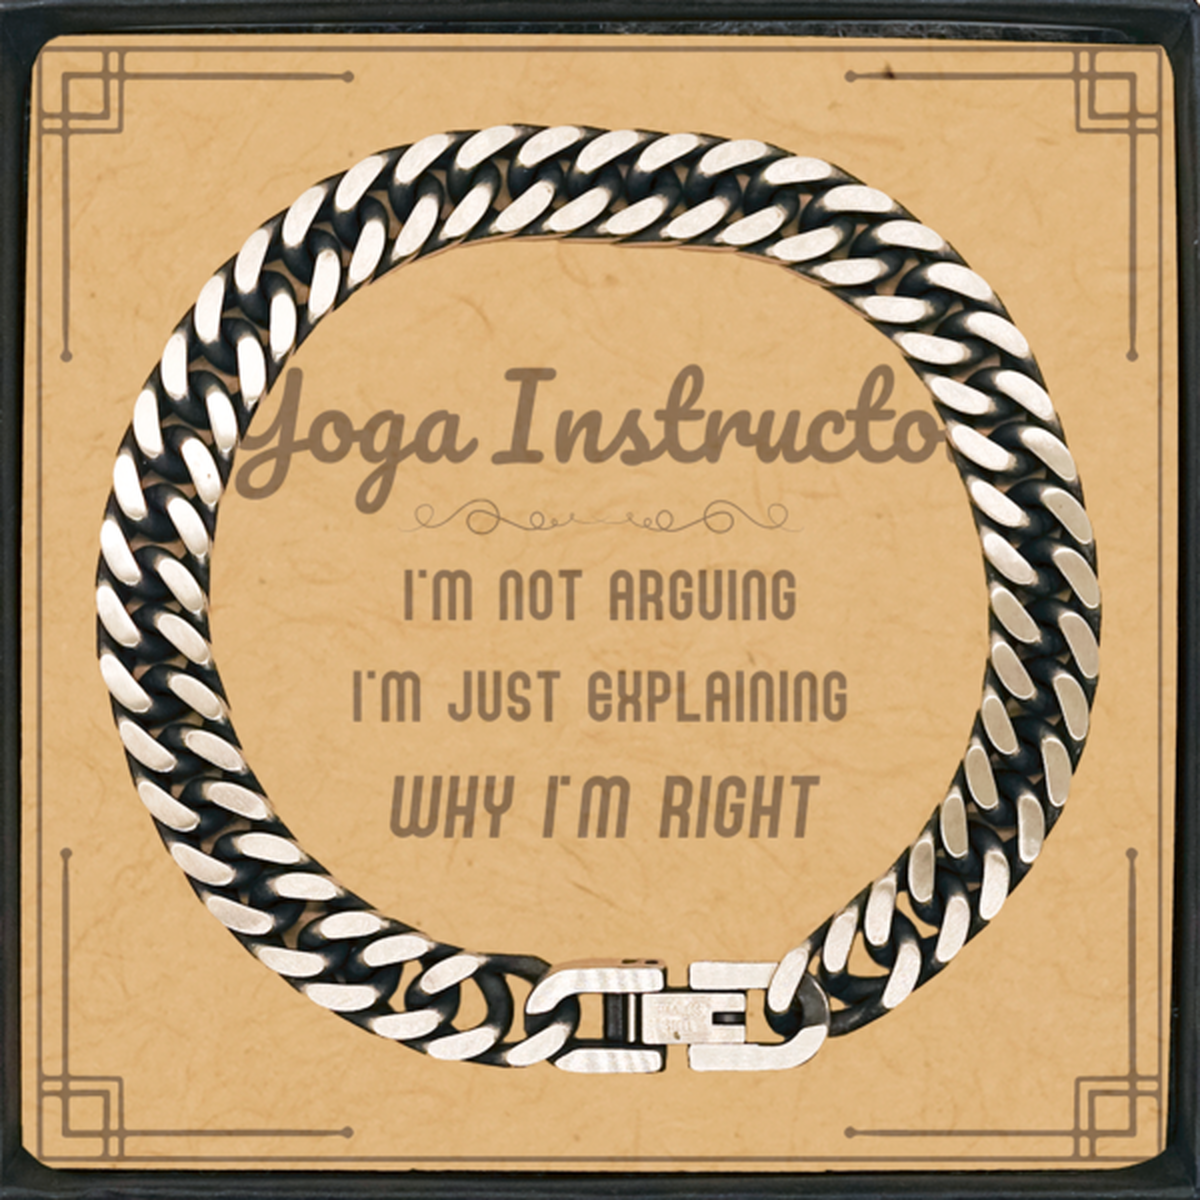 Yoga Instructor I'm not Arguing. I'm Just Explaining Why I'm RIGHT Cuban Link Chain Bracelet, Funny Saying Quote Yoga Instructor Gifts For Yoga Instructor Message Card Graduation Birthday Christmas Gifts for Men Women Coworker